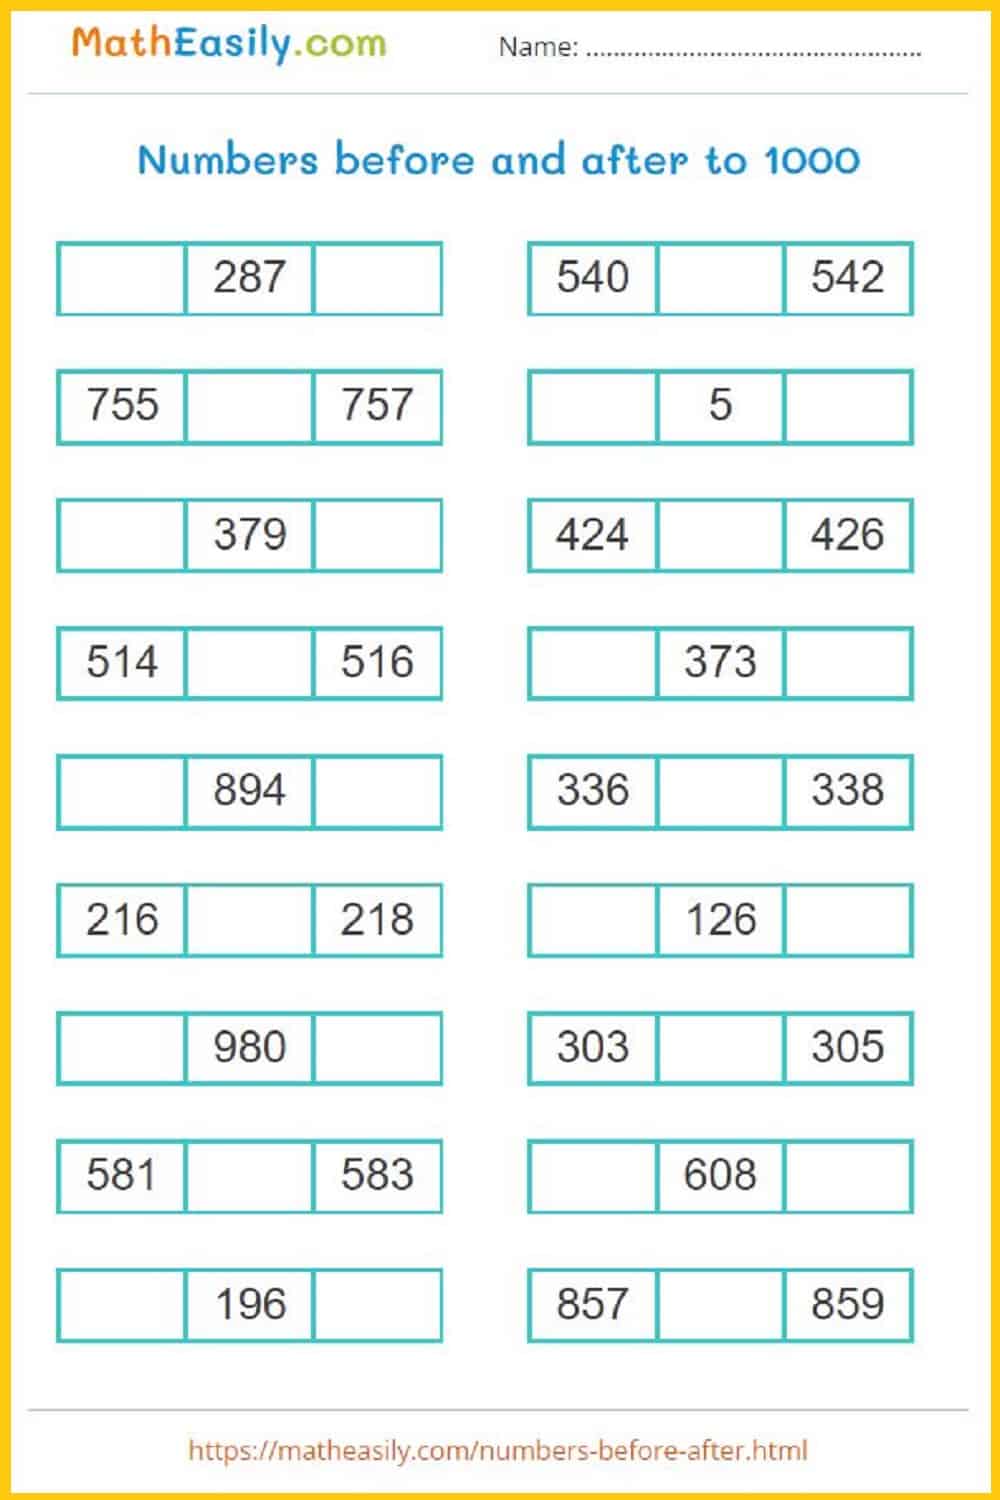 maths worksheets for 2nd class. 
  Free math worksheets for grade 2 PDF. Free printable 2nd grade math worksheets PDF free download.